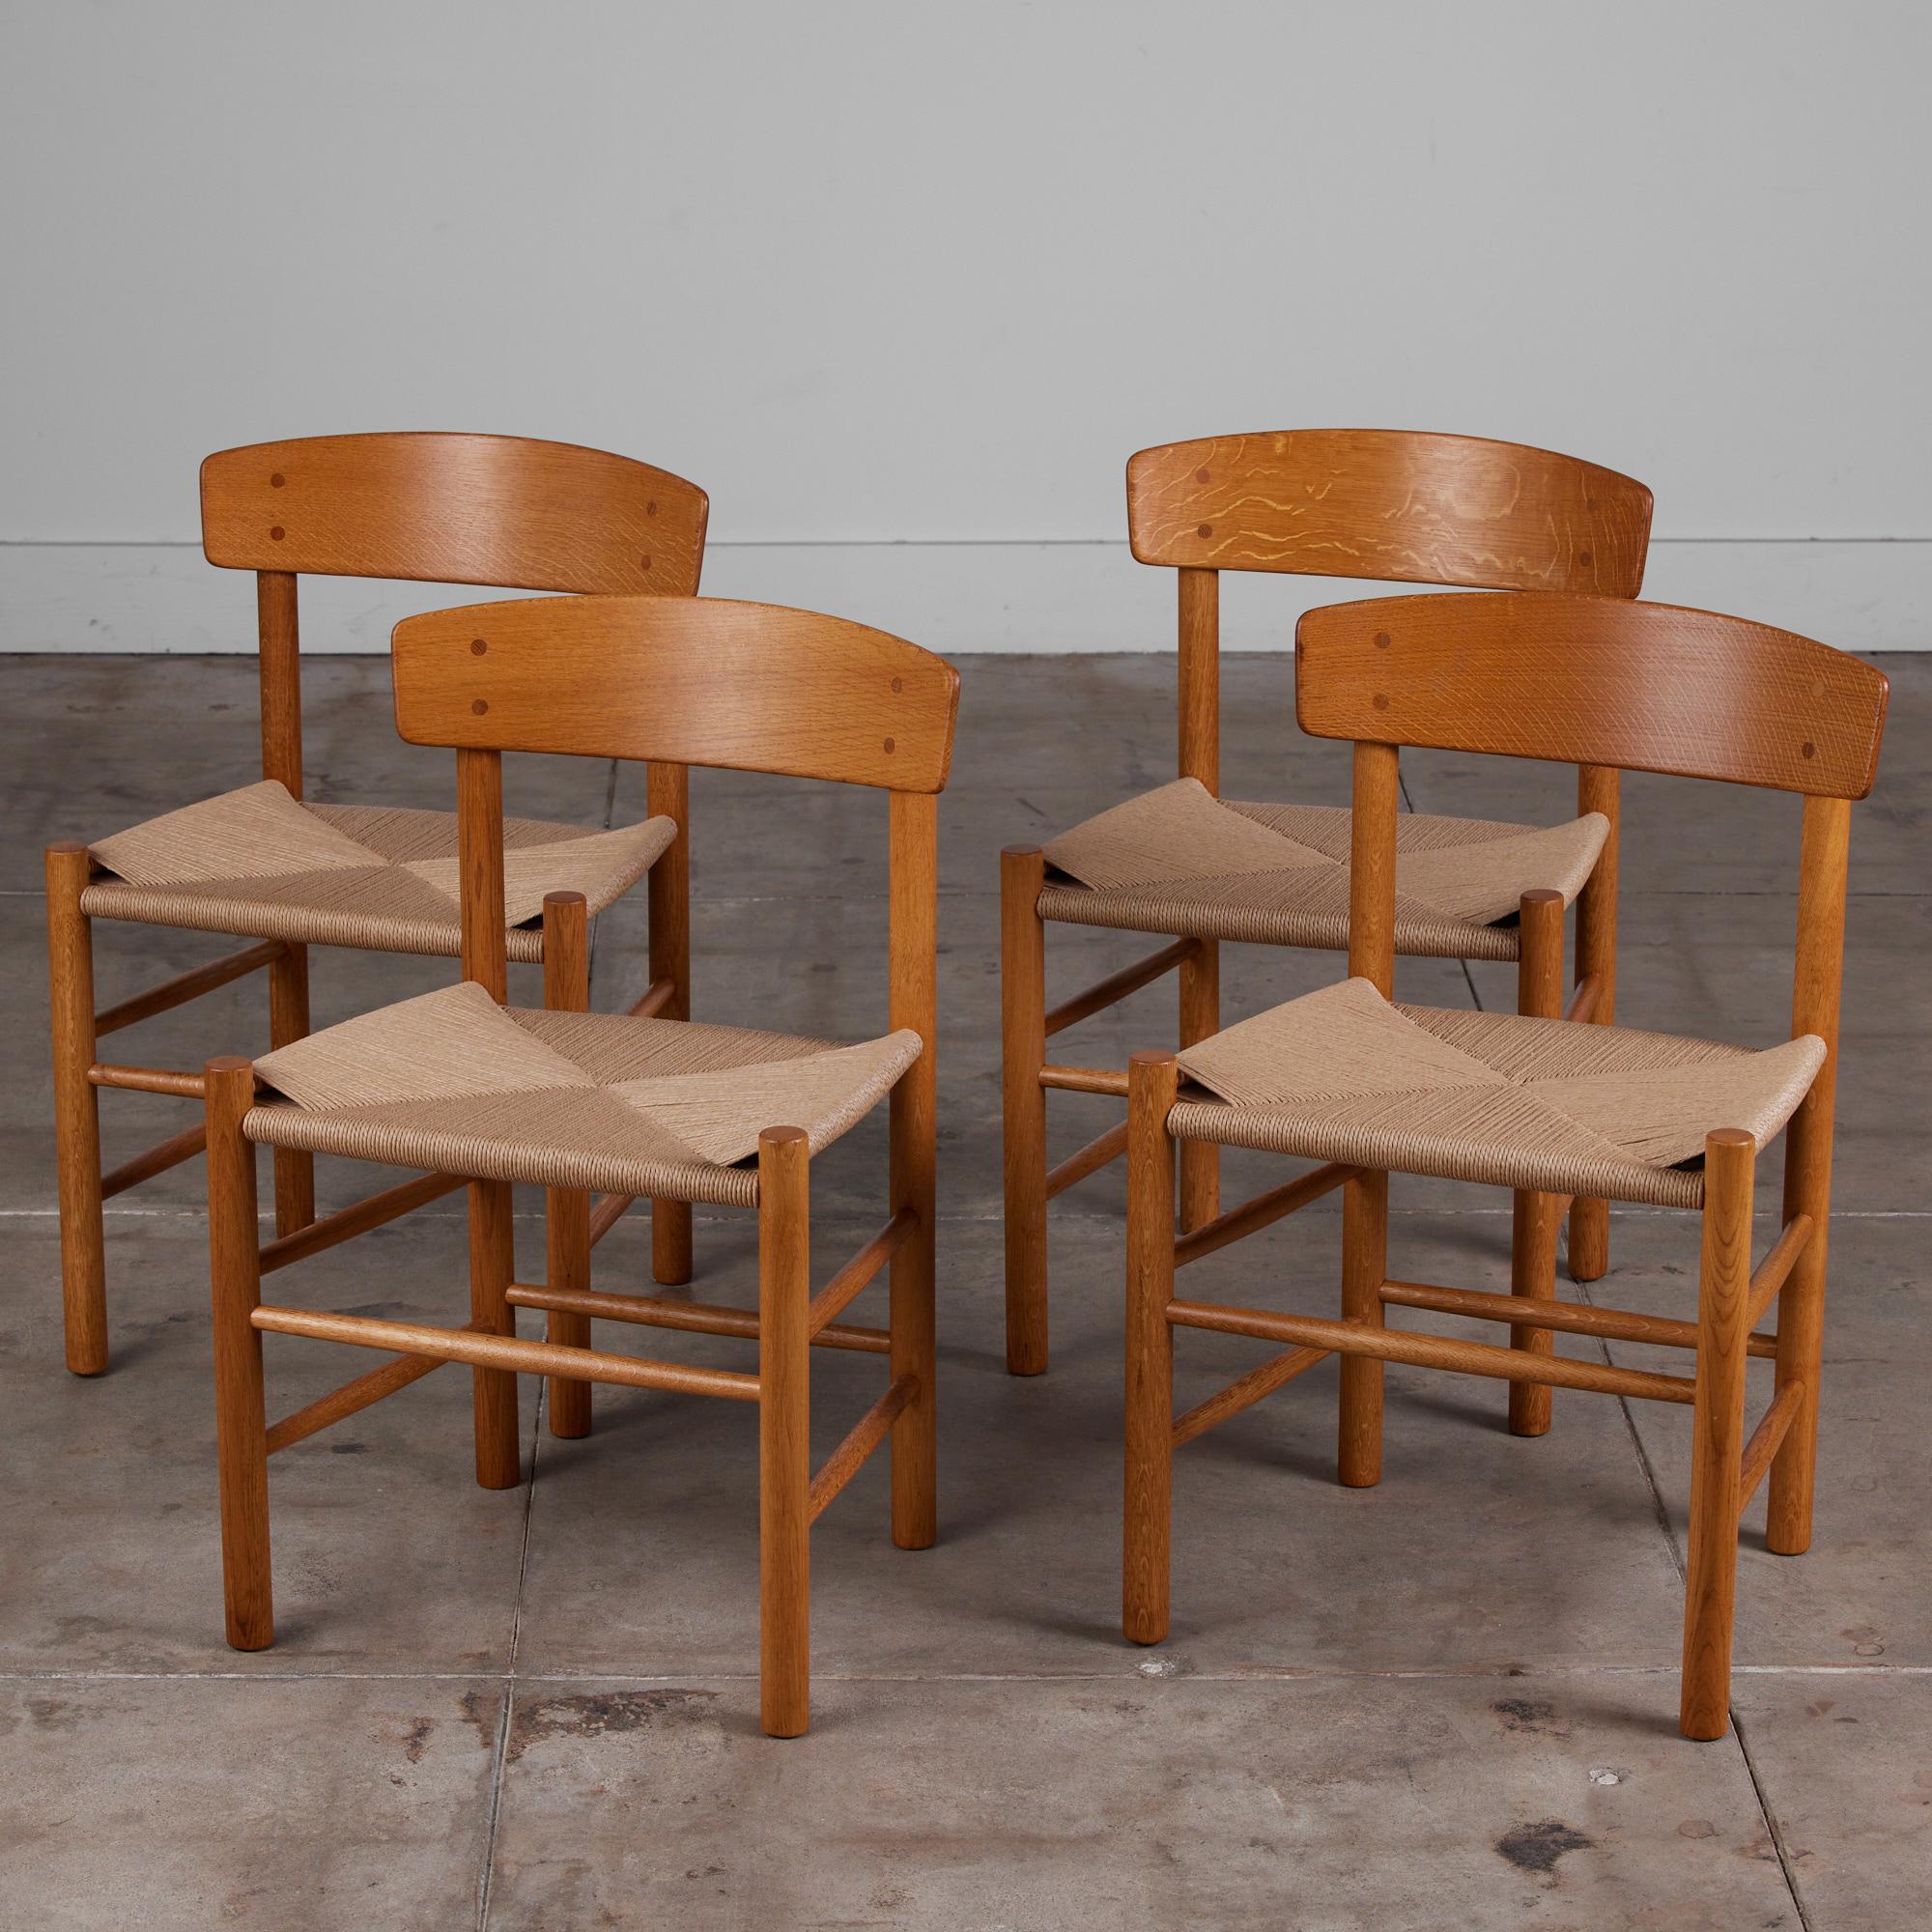 This set of oak Børge Mogensen dining chairs, Denmark, c.1950s, includes four side chairs. The chairs feature newly hand woven Danish cord seats.

Dimensions: ?19.5